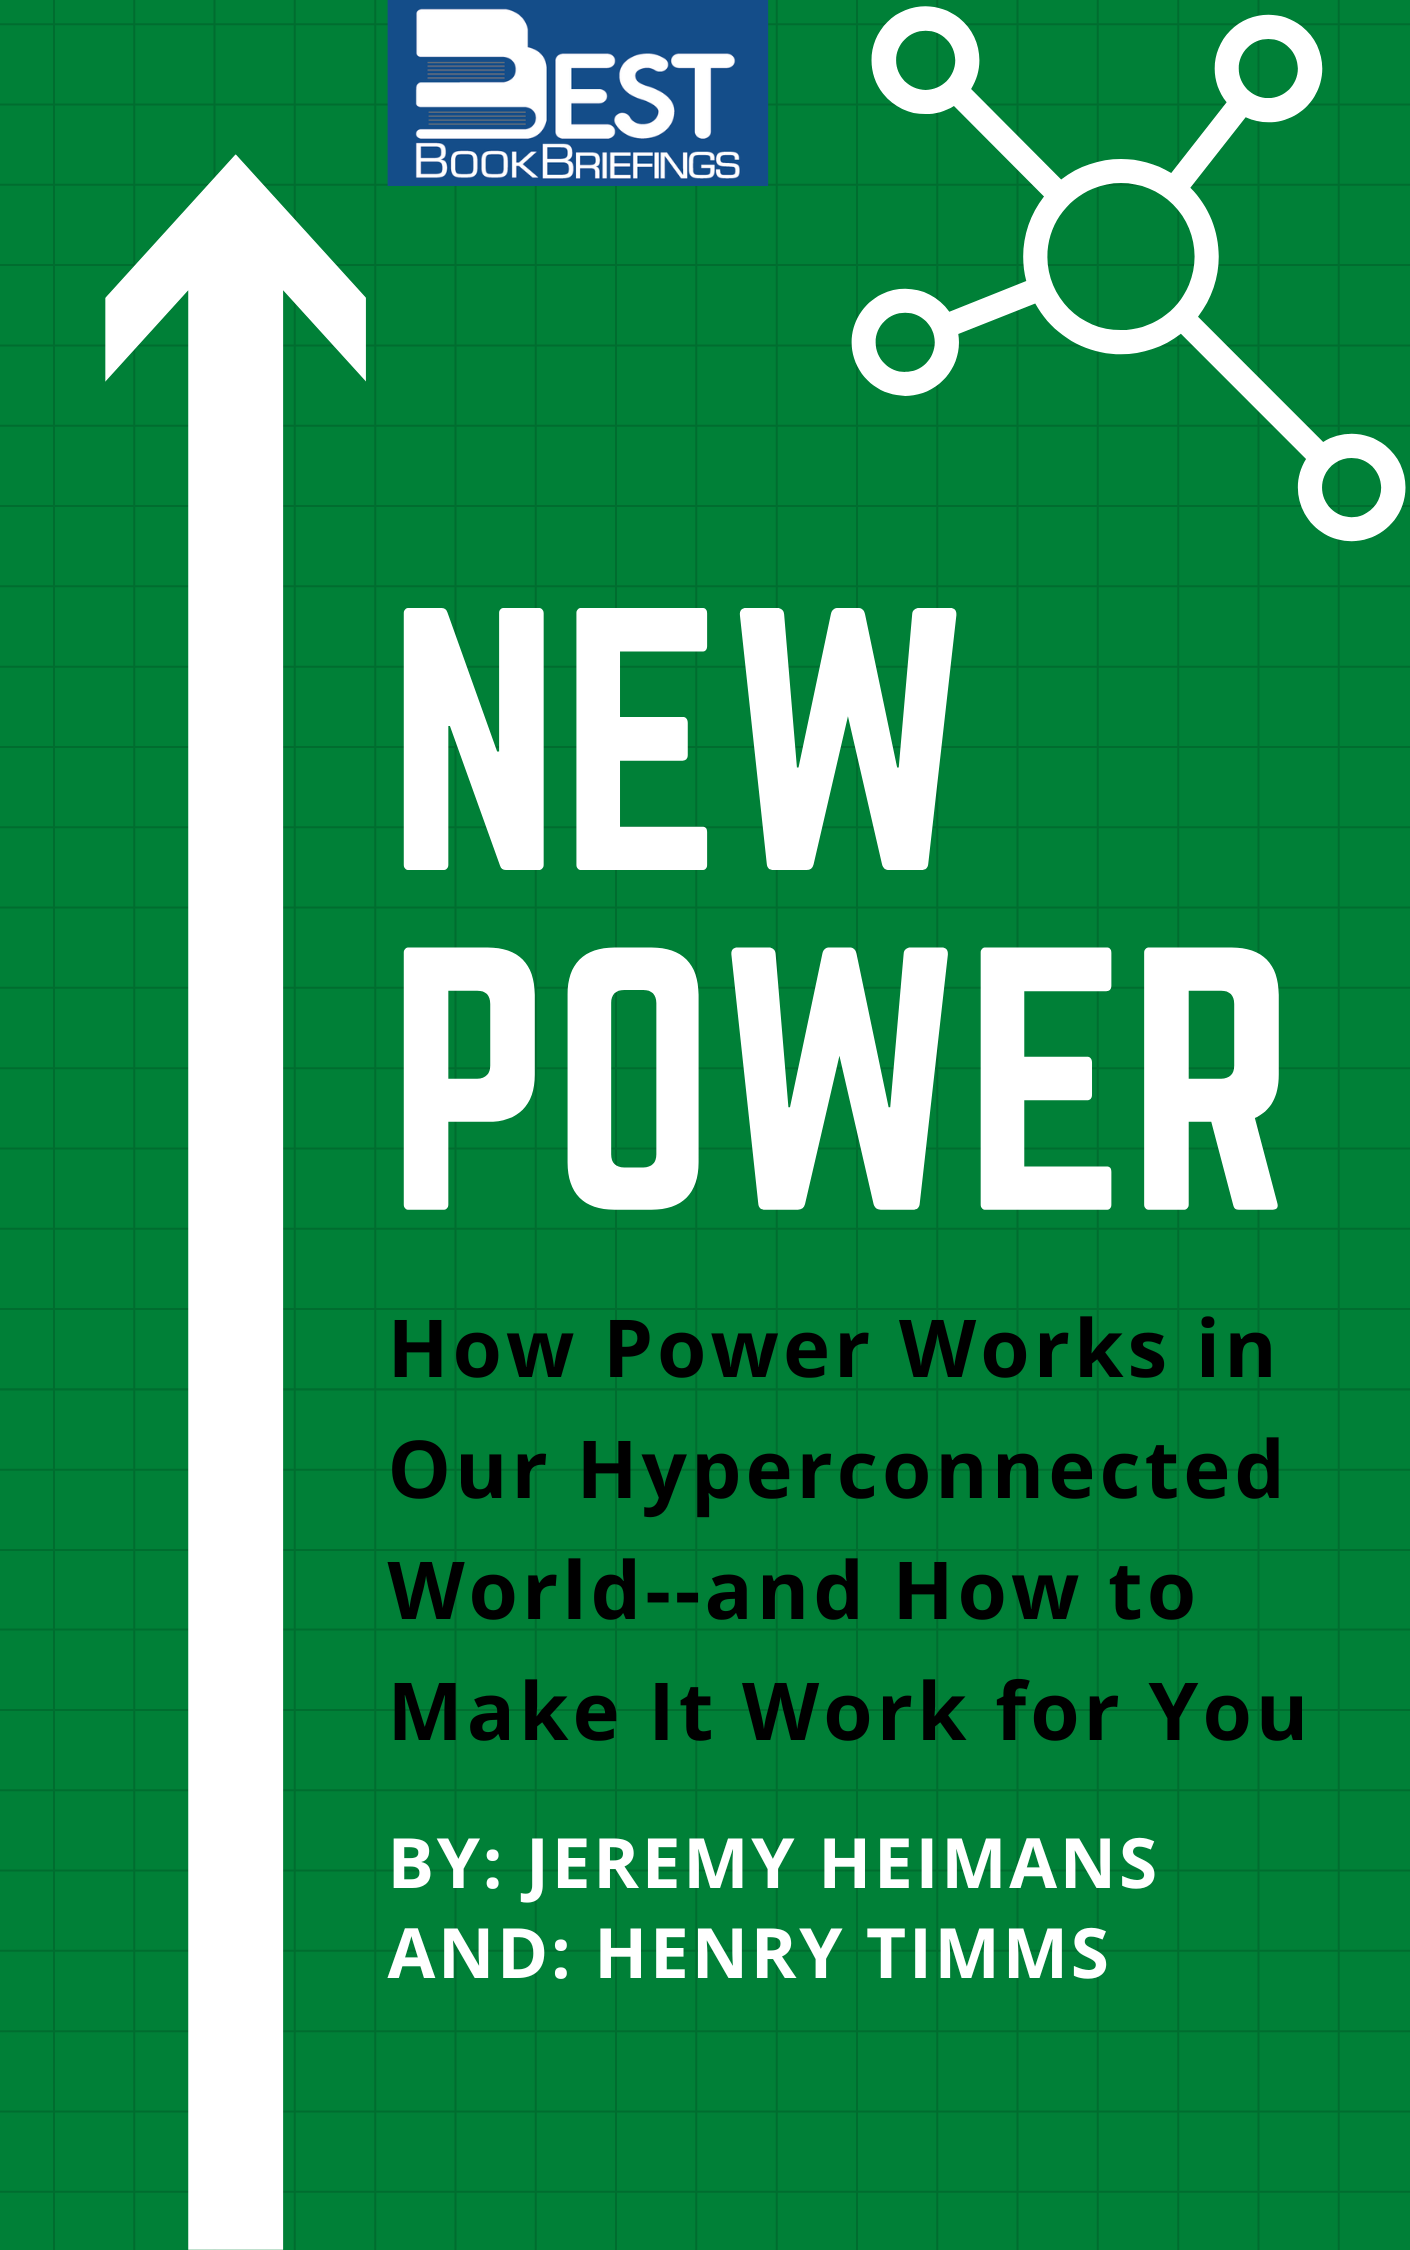      New Power shines fresh light on the cultural phenomena of our day, from #BlackLivesMatter to the Ice Bucket Challenge to Airbnb, uncovering the new power forces that made them huge. Drawing on examples from business, activism, and pop culture, as well as the study of organizations like Lego, NASA, 